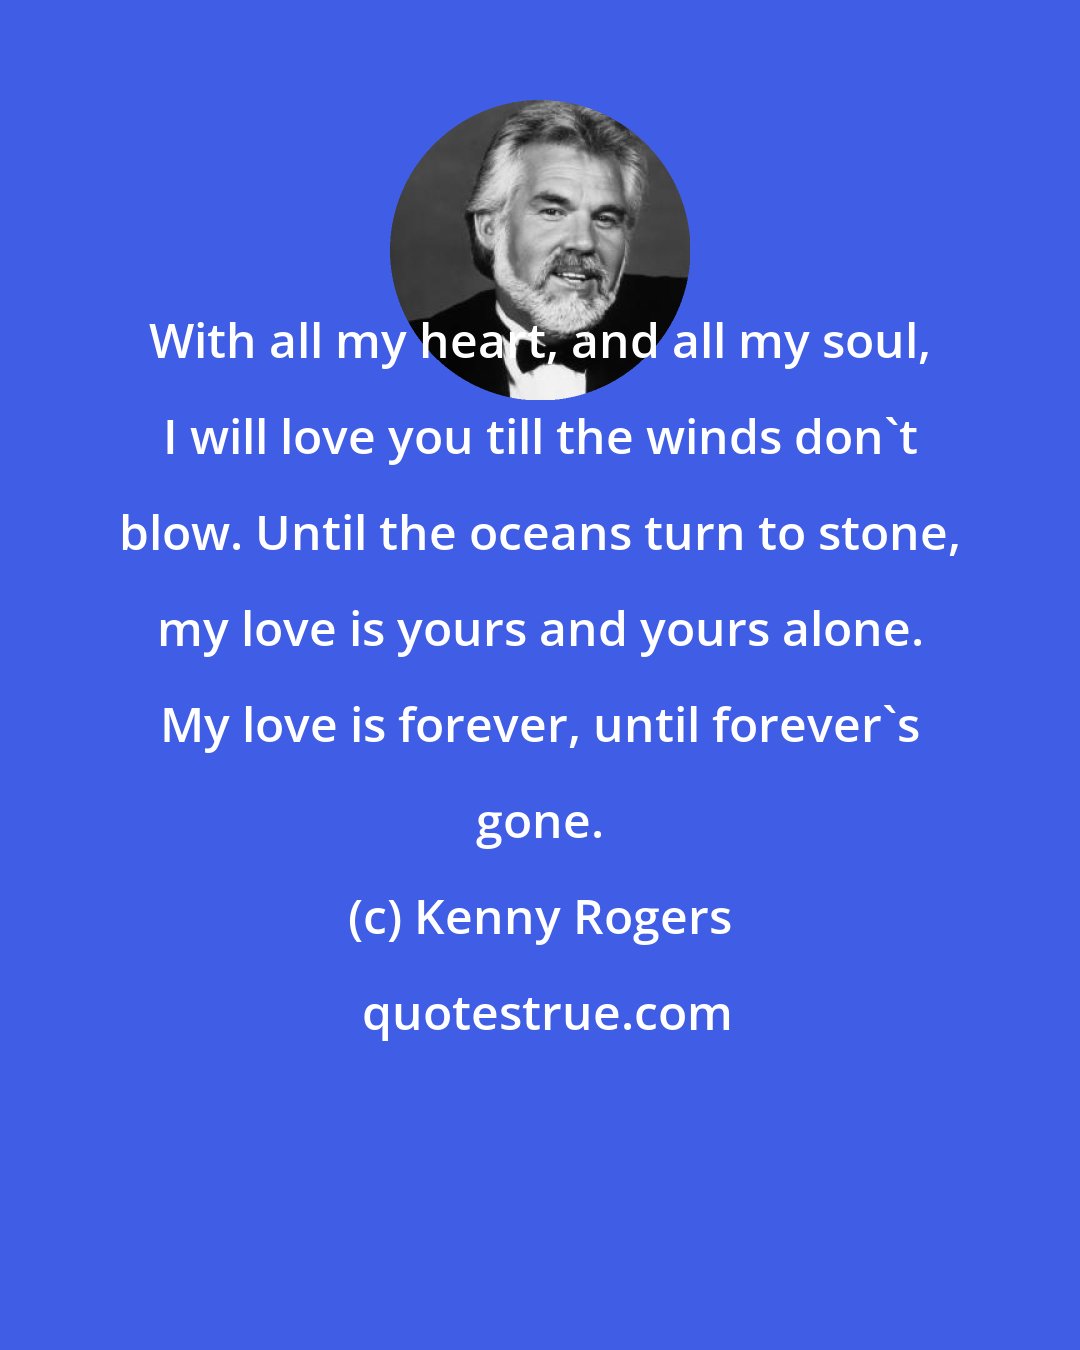 Kenny Rogers: With all my heart, and all my soul, I will love you till the winds don't blow. Until the oceans turn to stone, my love is yours and yours alone. My love is forever, until forever's gone.